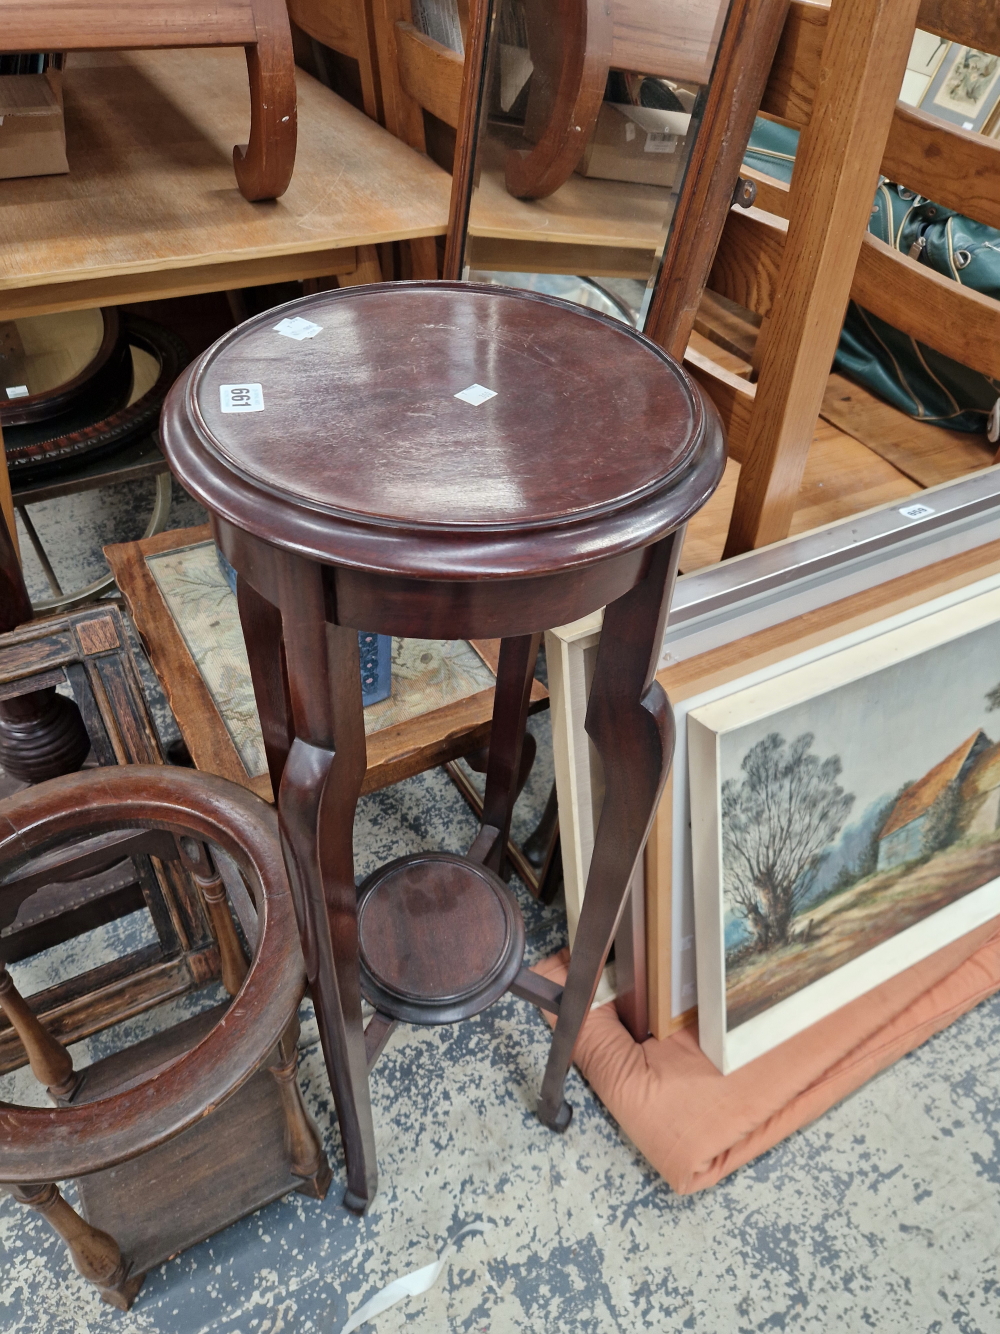 A MAHOGANY TWO TIER PLANTER STAND, A WASH BOWL TABLE, A MAHOGANY COLUMN, A COFFEE TABLE WITH A